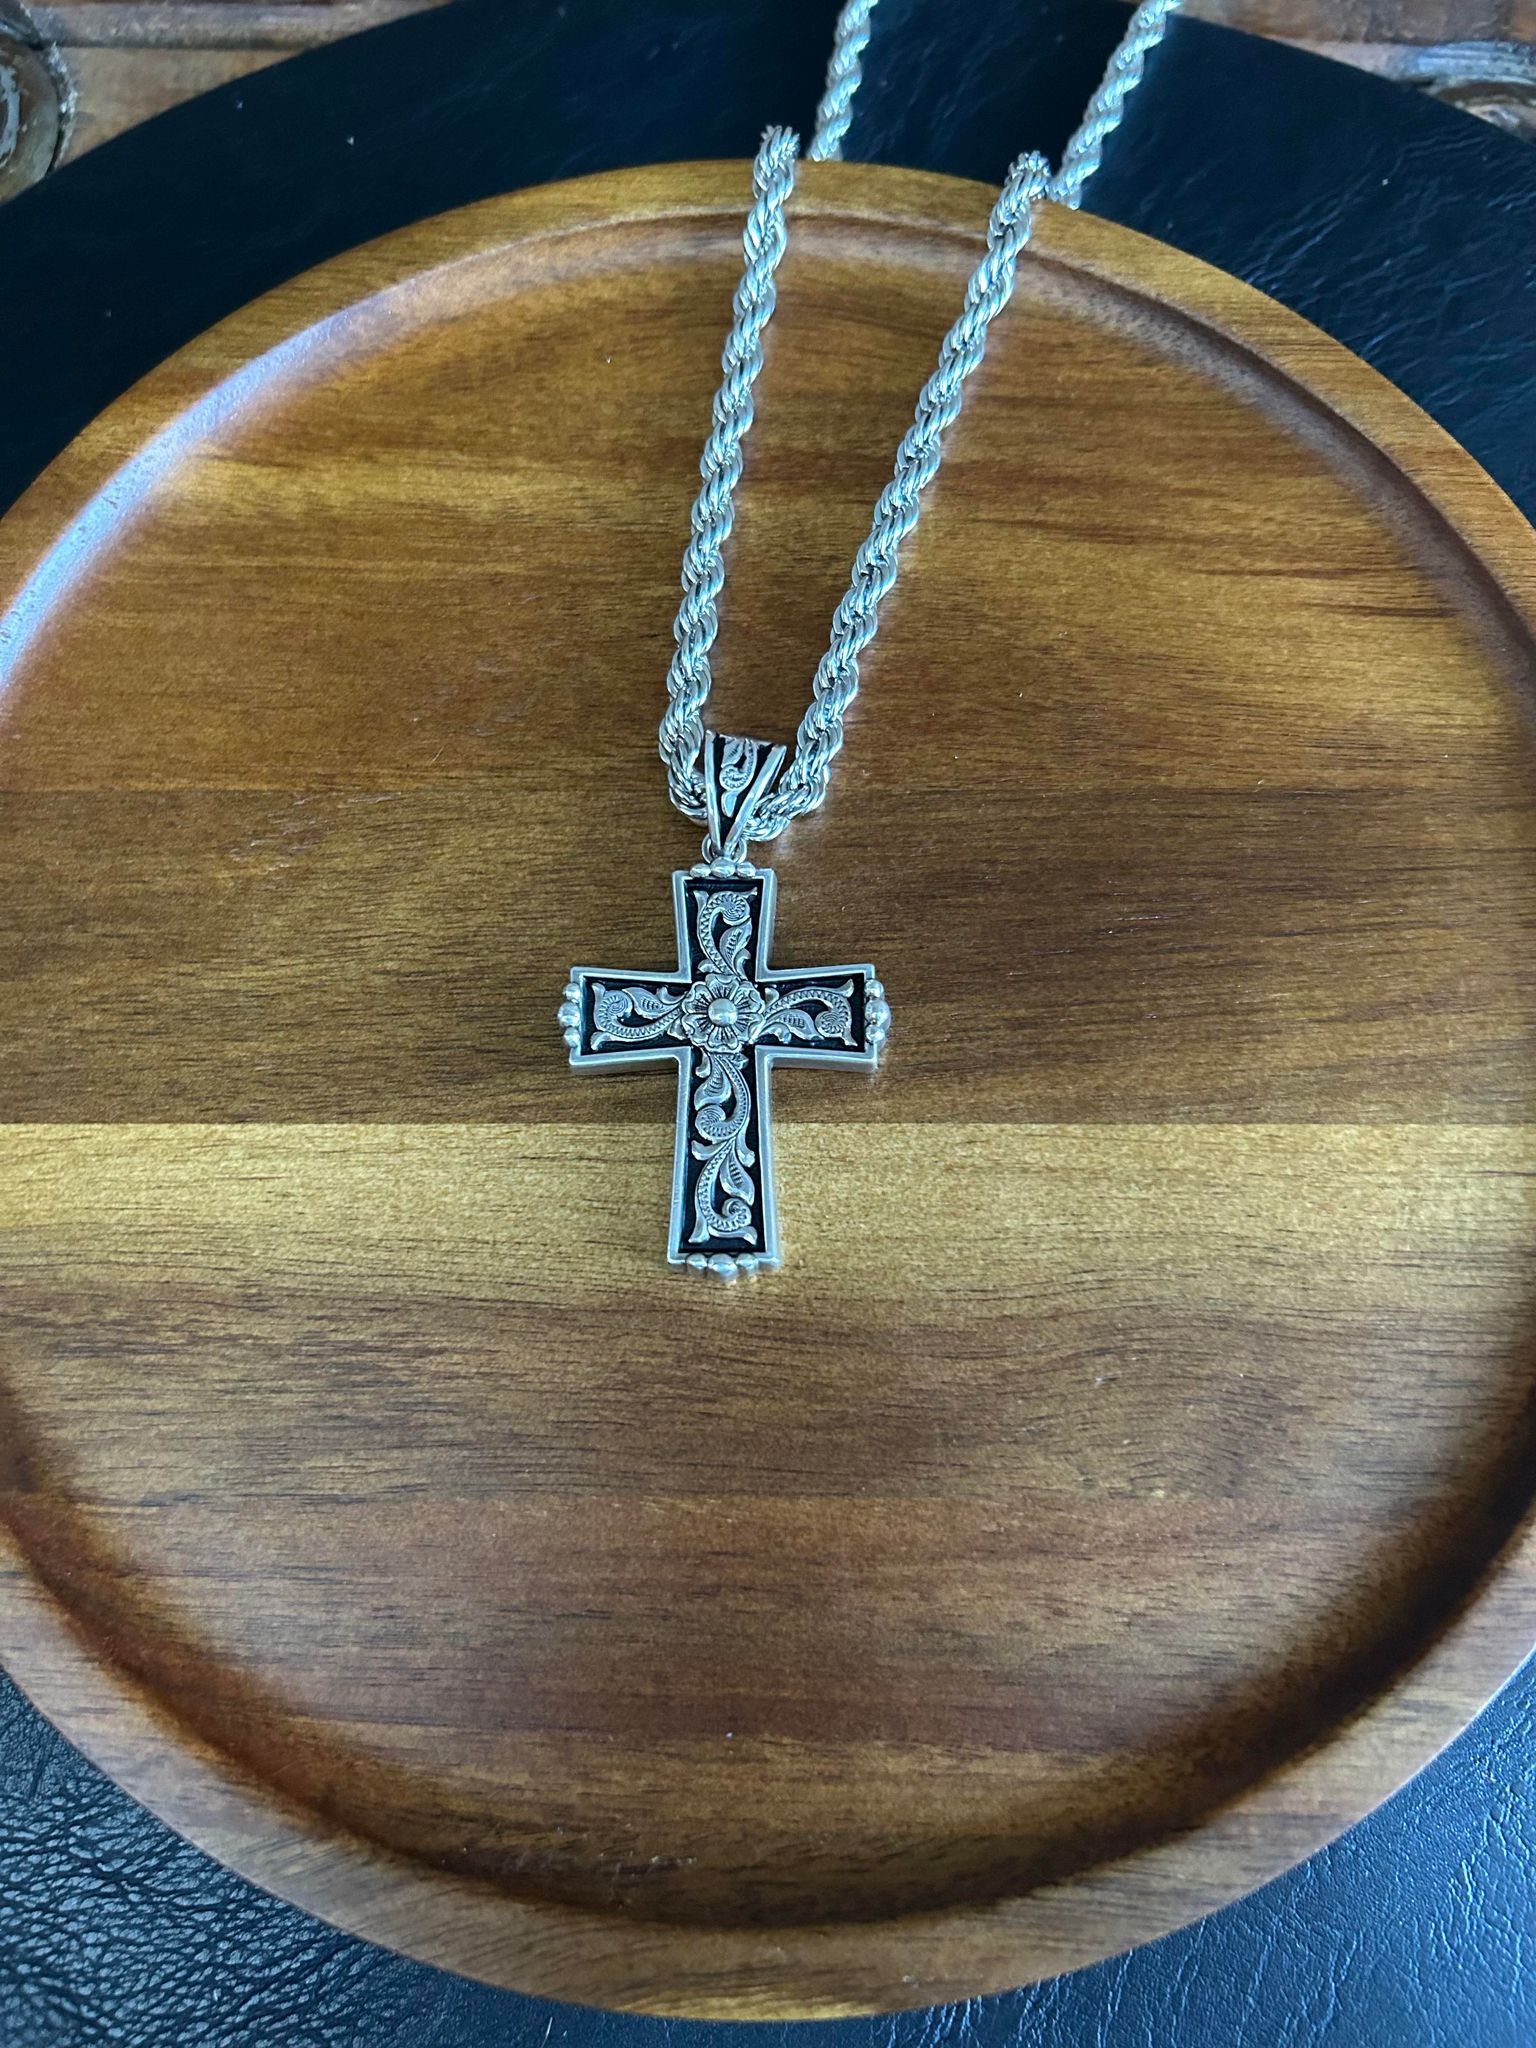 Men's Twister Silver Cross Necklace-Necklaces-M & F Western Products-Lucky J Boots & More, Women's, Men's, & Kids Western Store Located in Carthage, MO